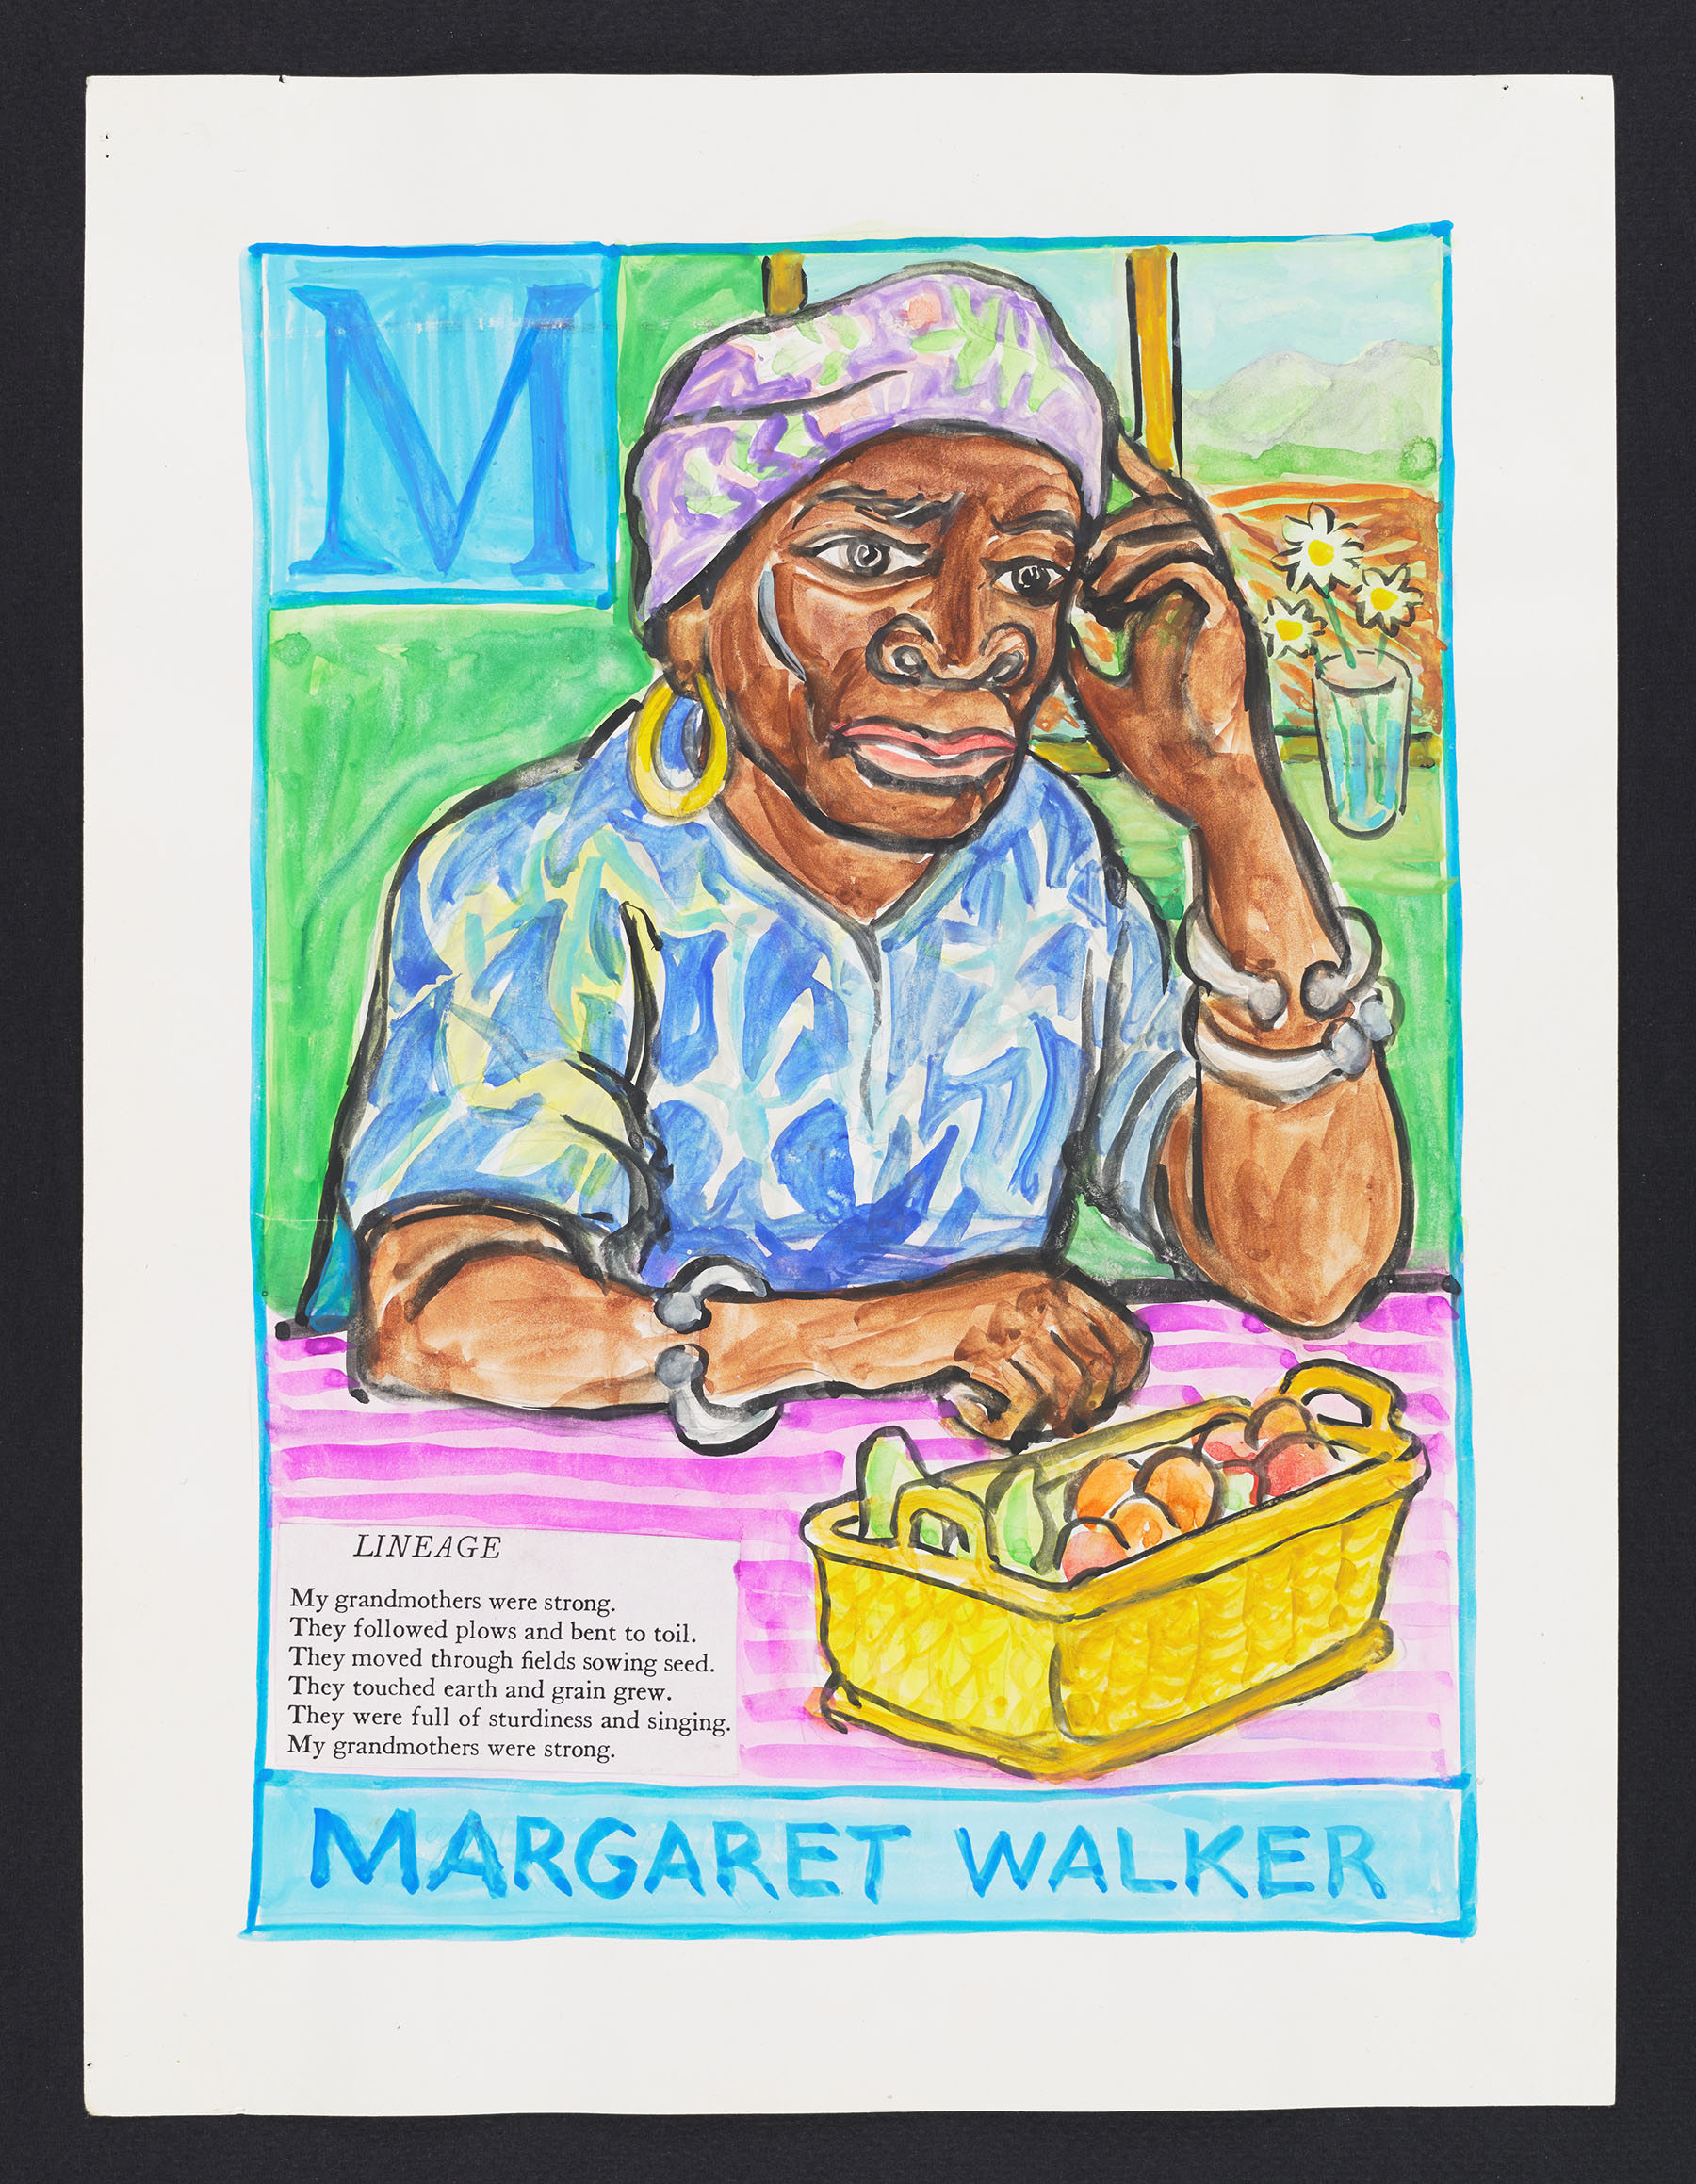 Letter M: poetry by Margaret Walker, by Ashley Bryan